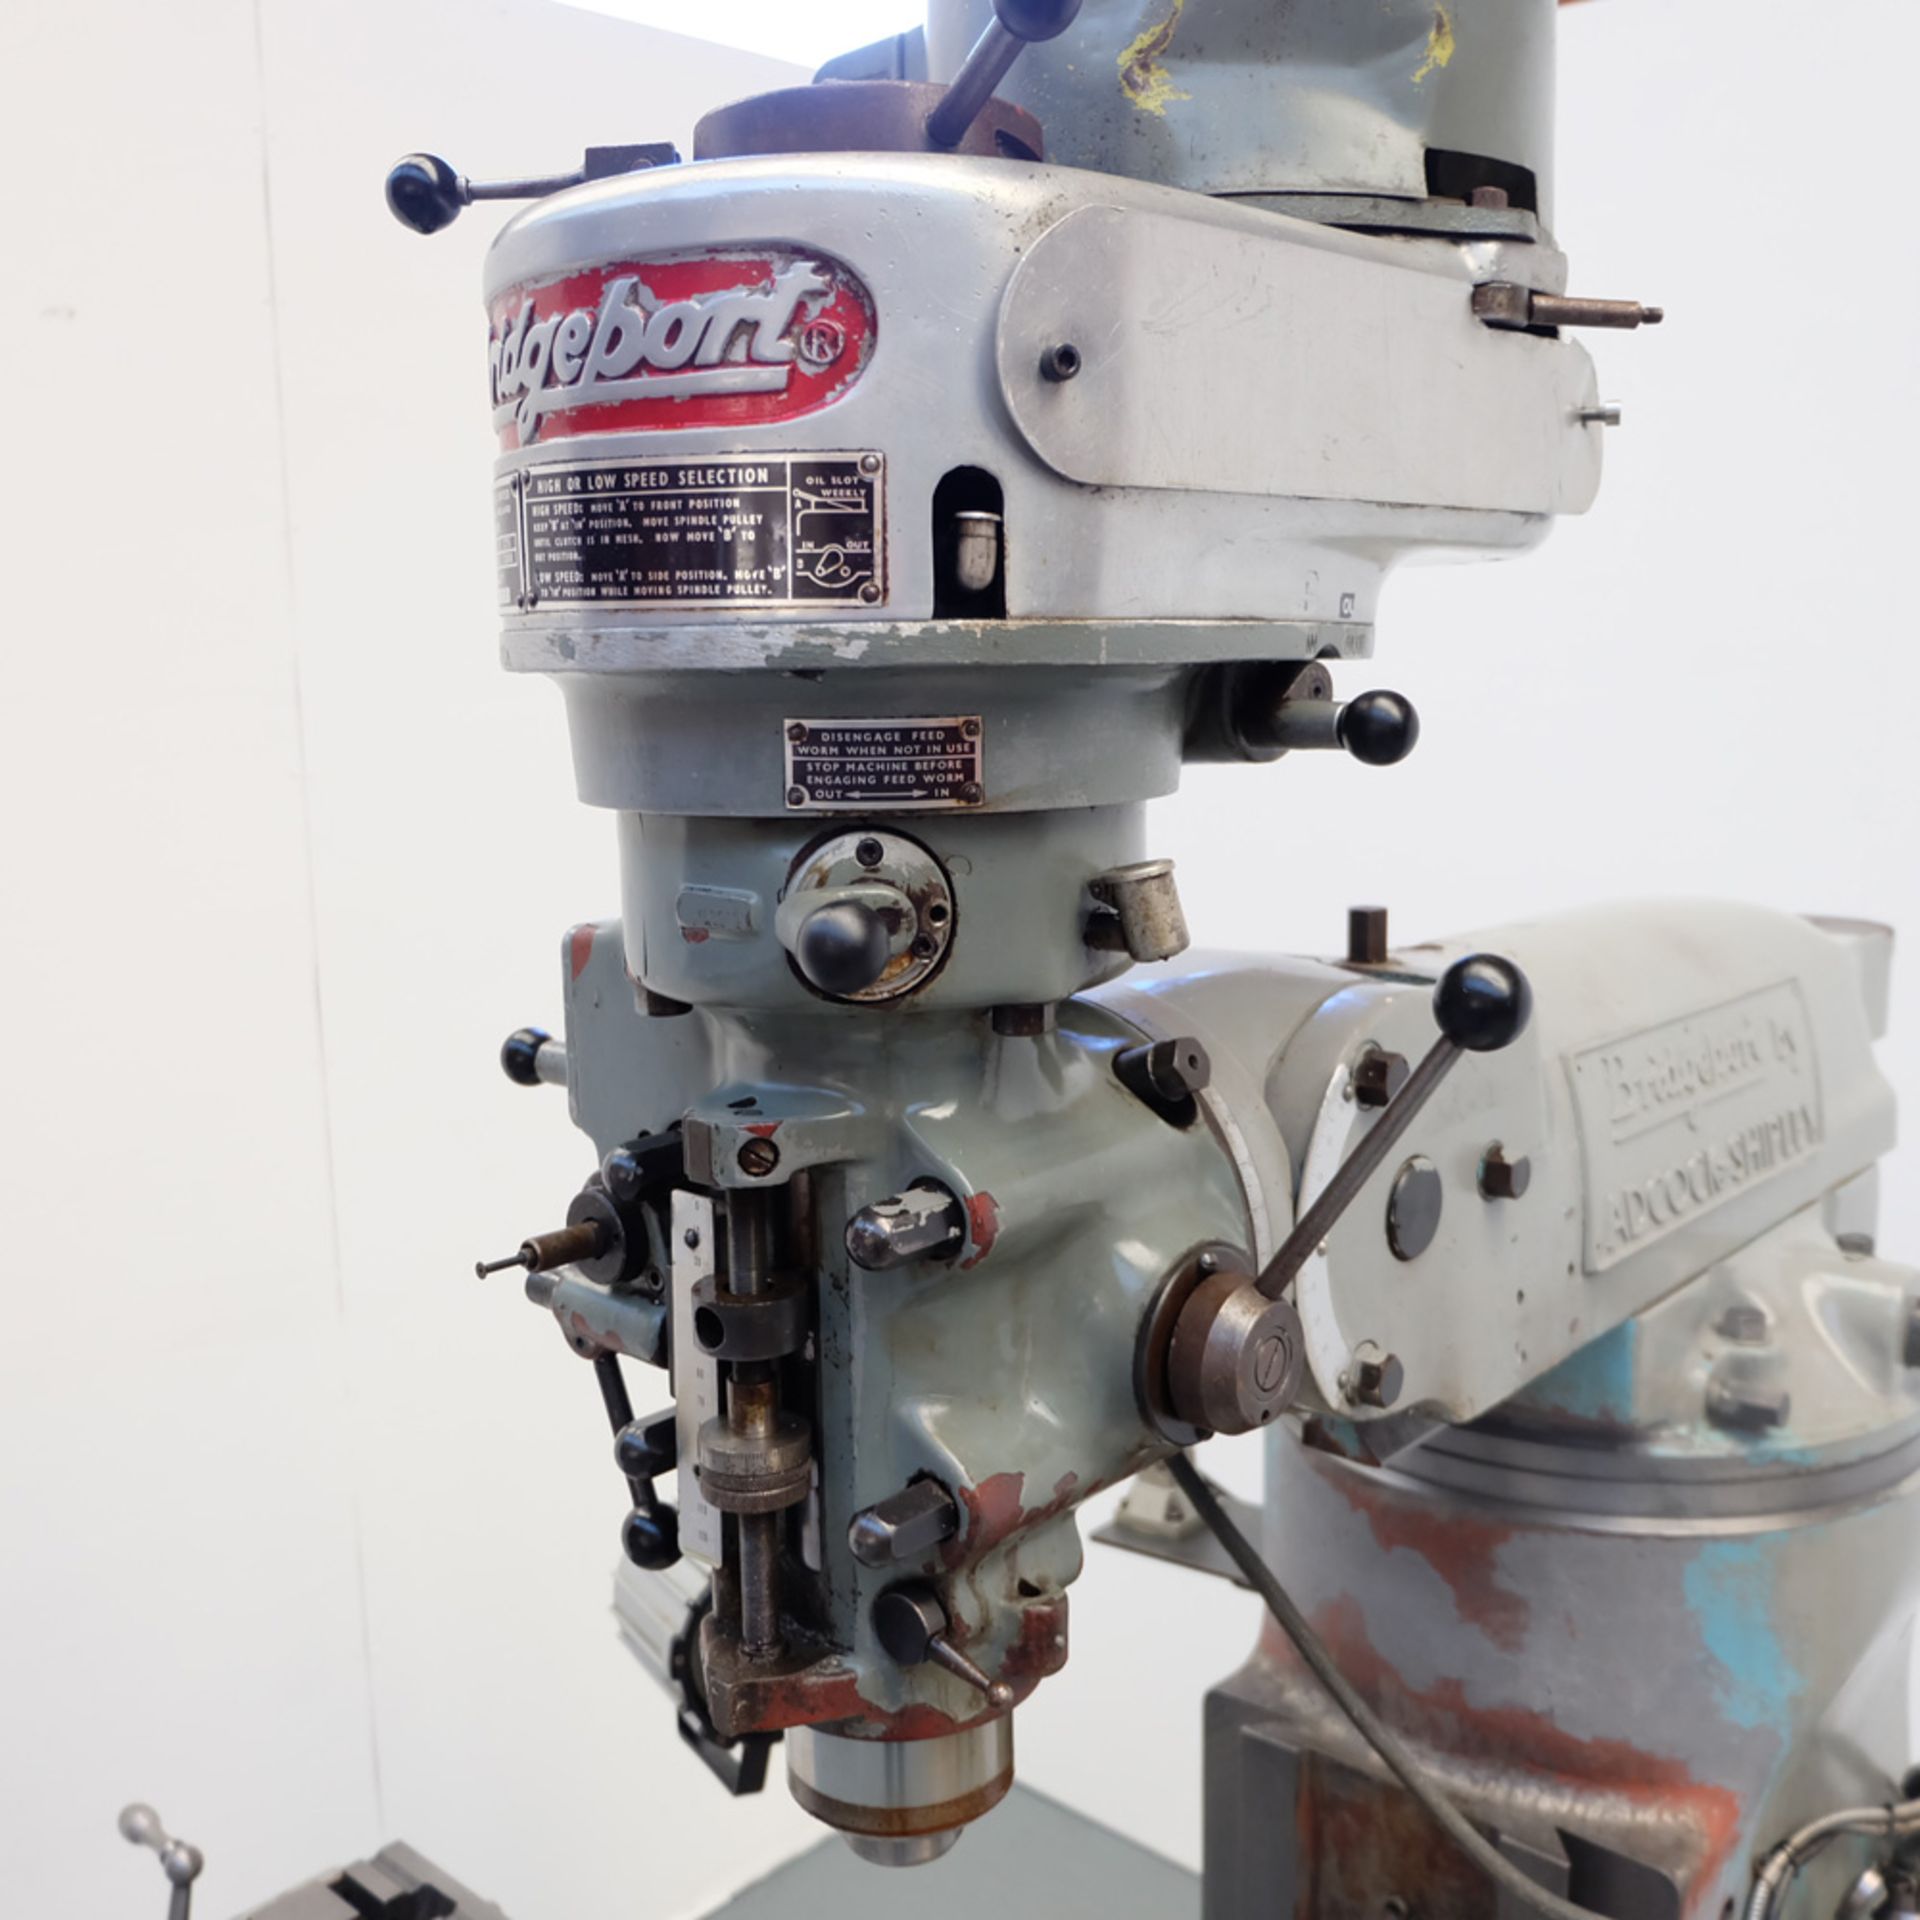 Bridgeport J Type Turret Milling Machine. Table Size 42" x 9". Spindle Taper R8. - Image 2 of 9